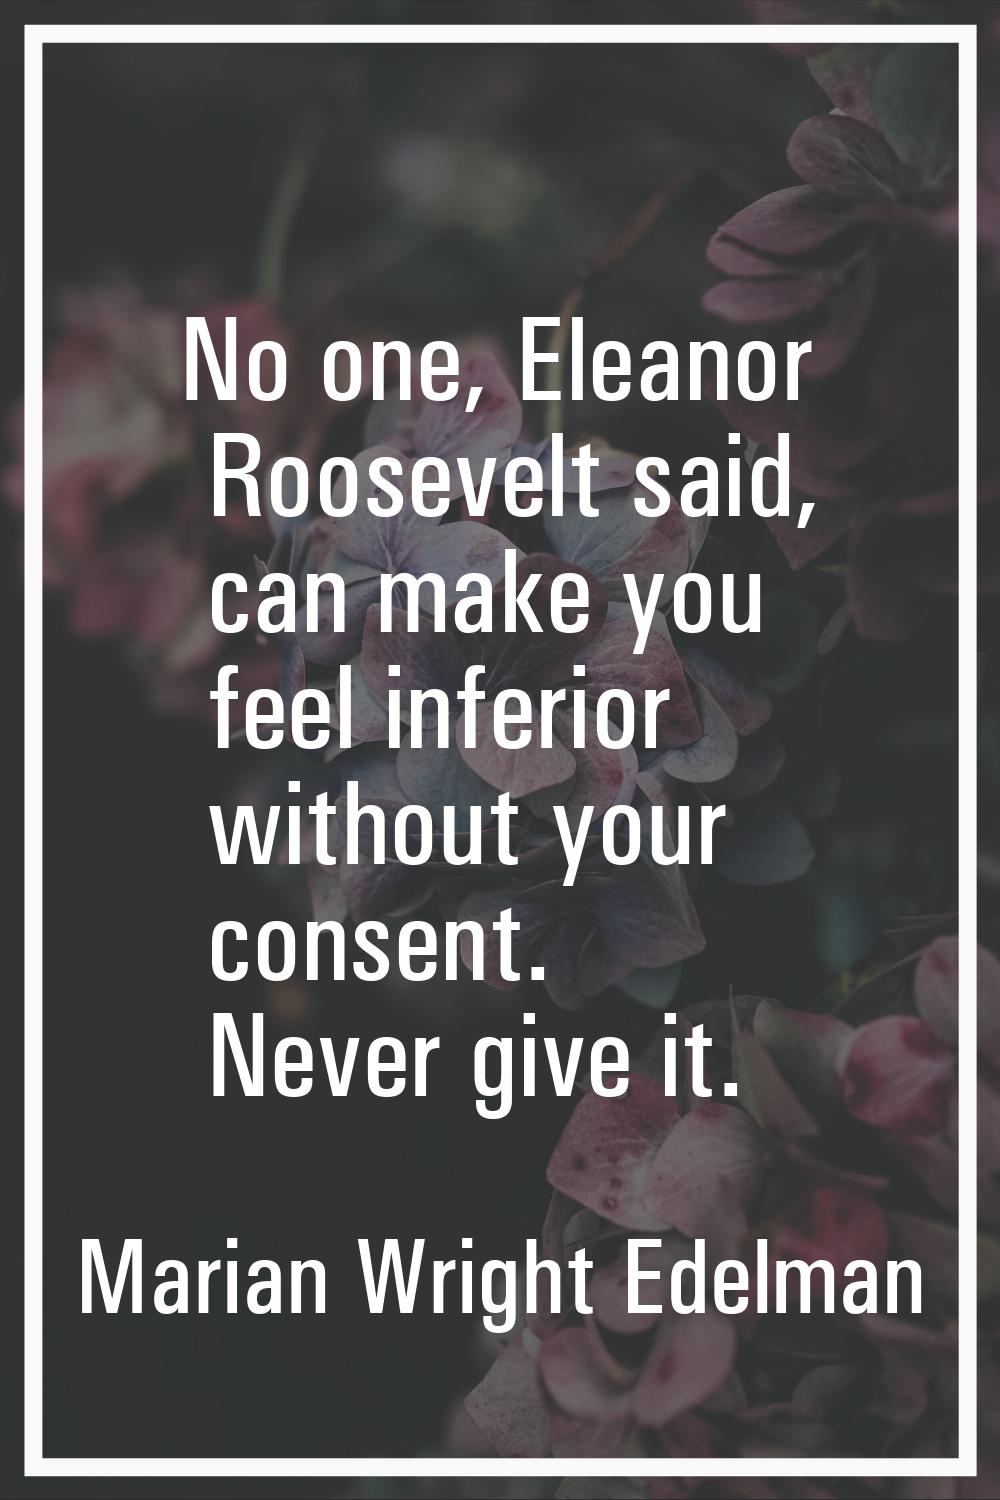 No one, Eleanor Roosevelt said, can make you feel inferior without your consent. Never give it.